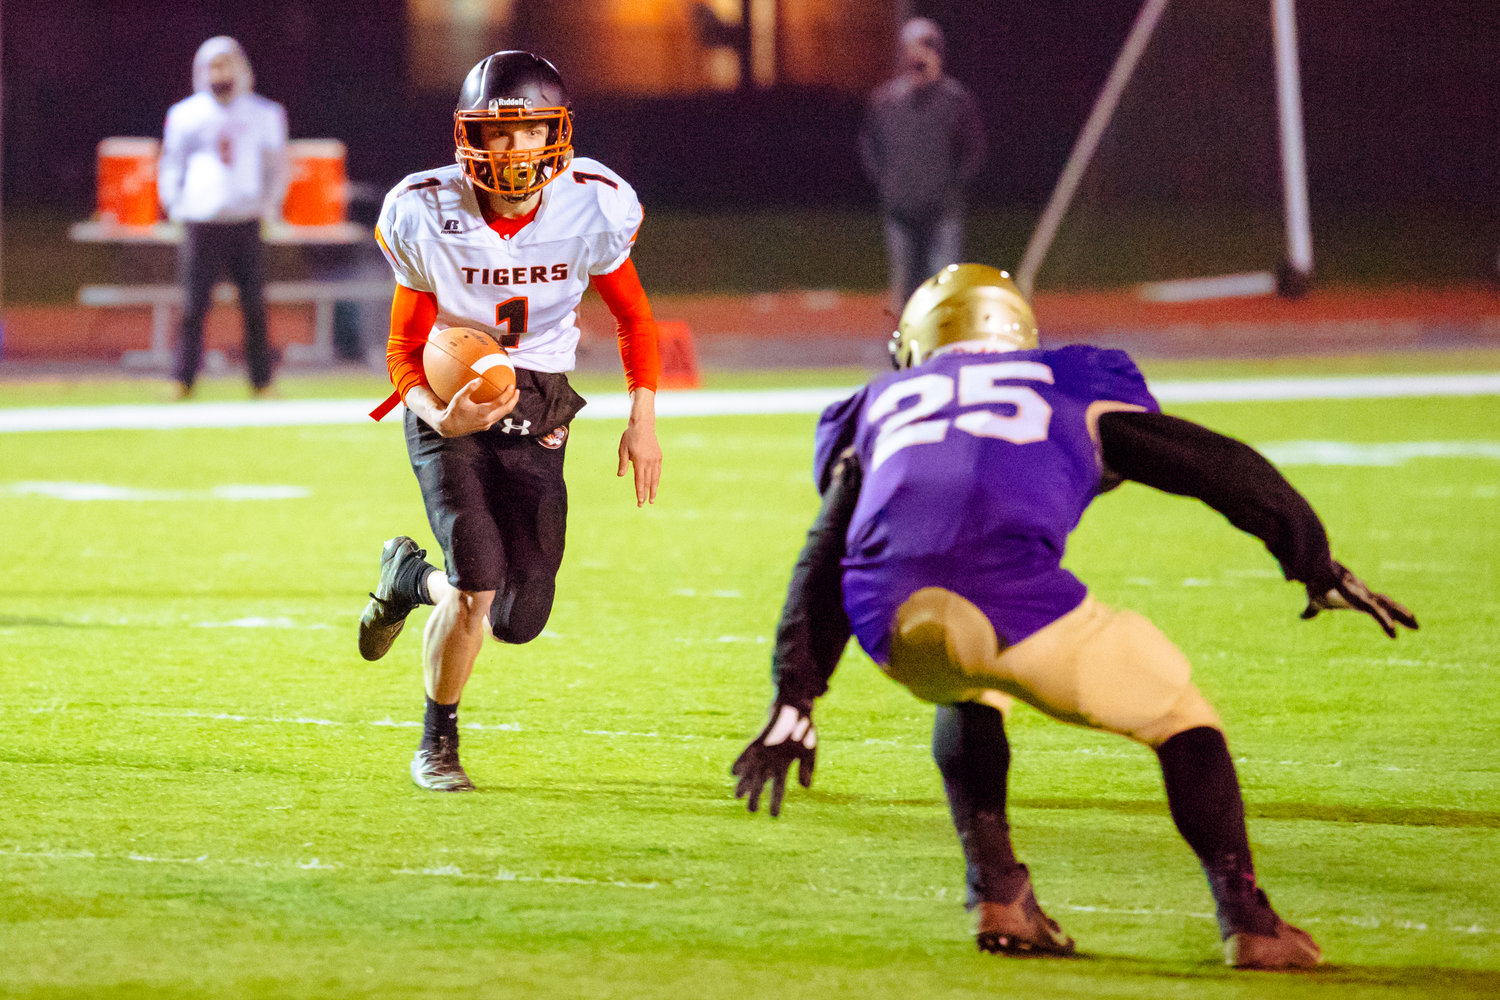 FILE PHOTO - Napavine's Laythan Demarest (1) runs with the football during a game against Onalaska at Tiger Stadium.